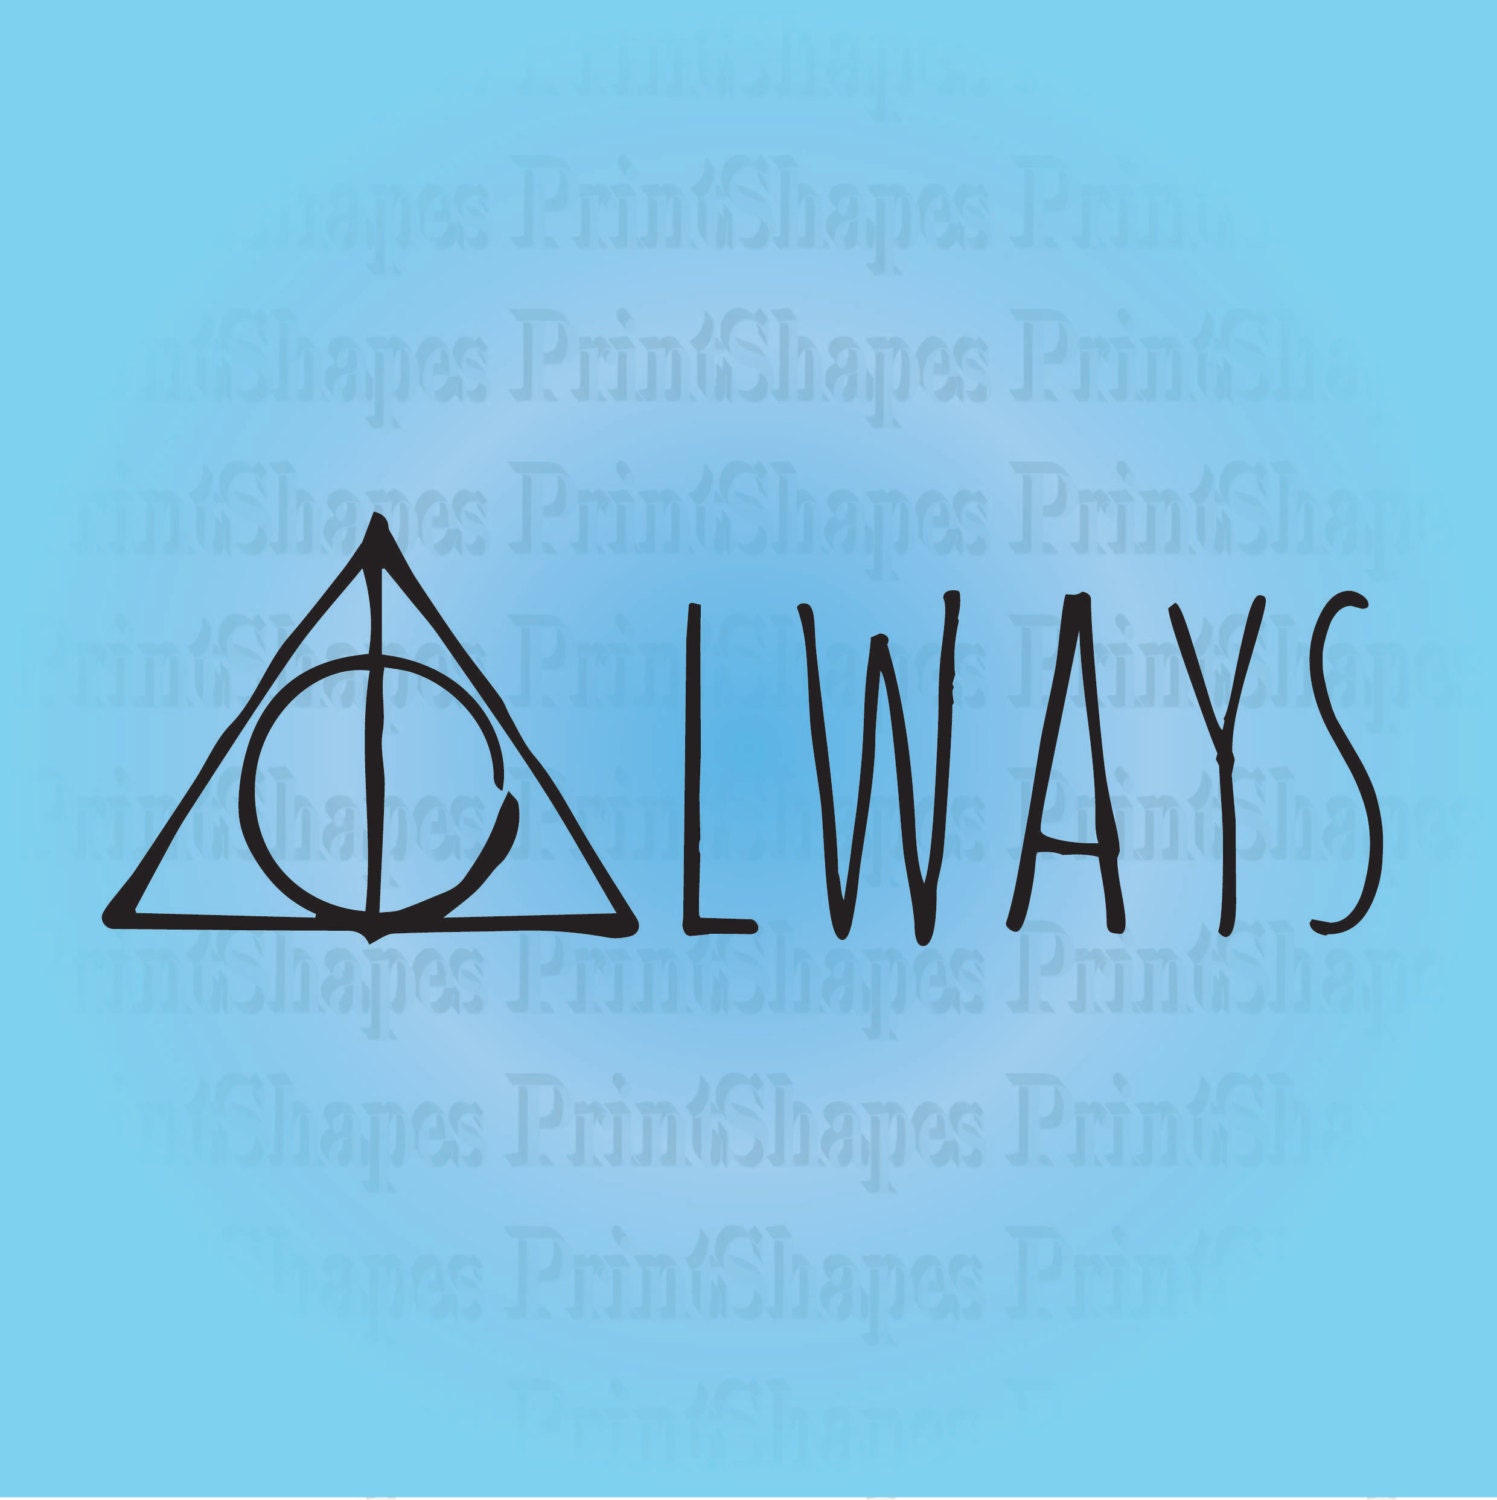 Download Harry Potter Always SVG EPS DXF Ai vector file for by ...